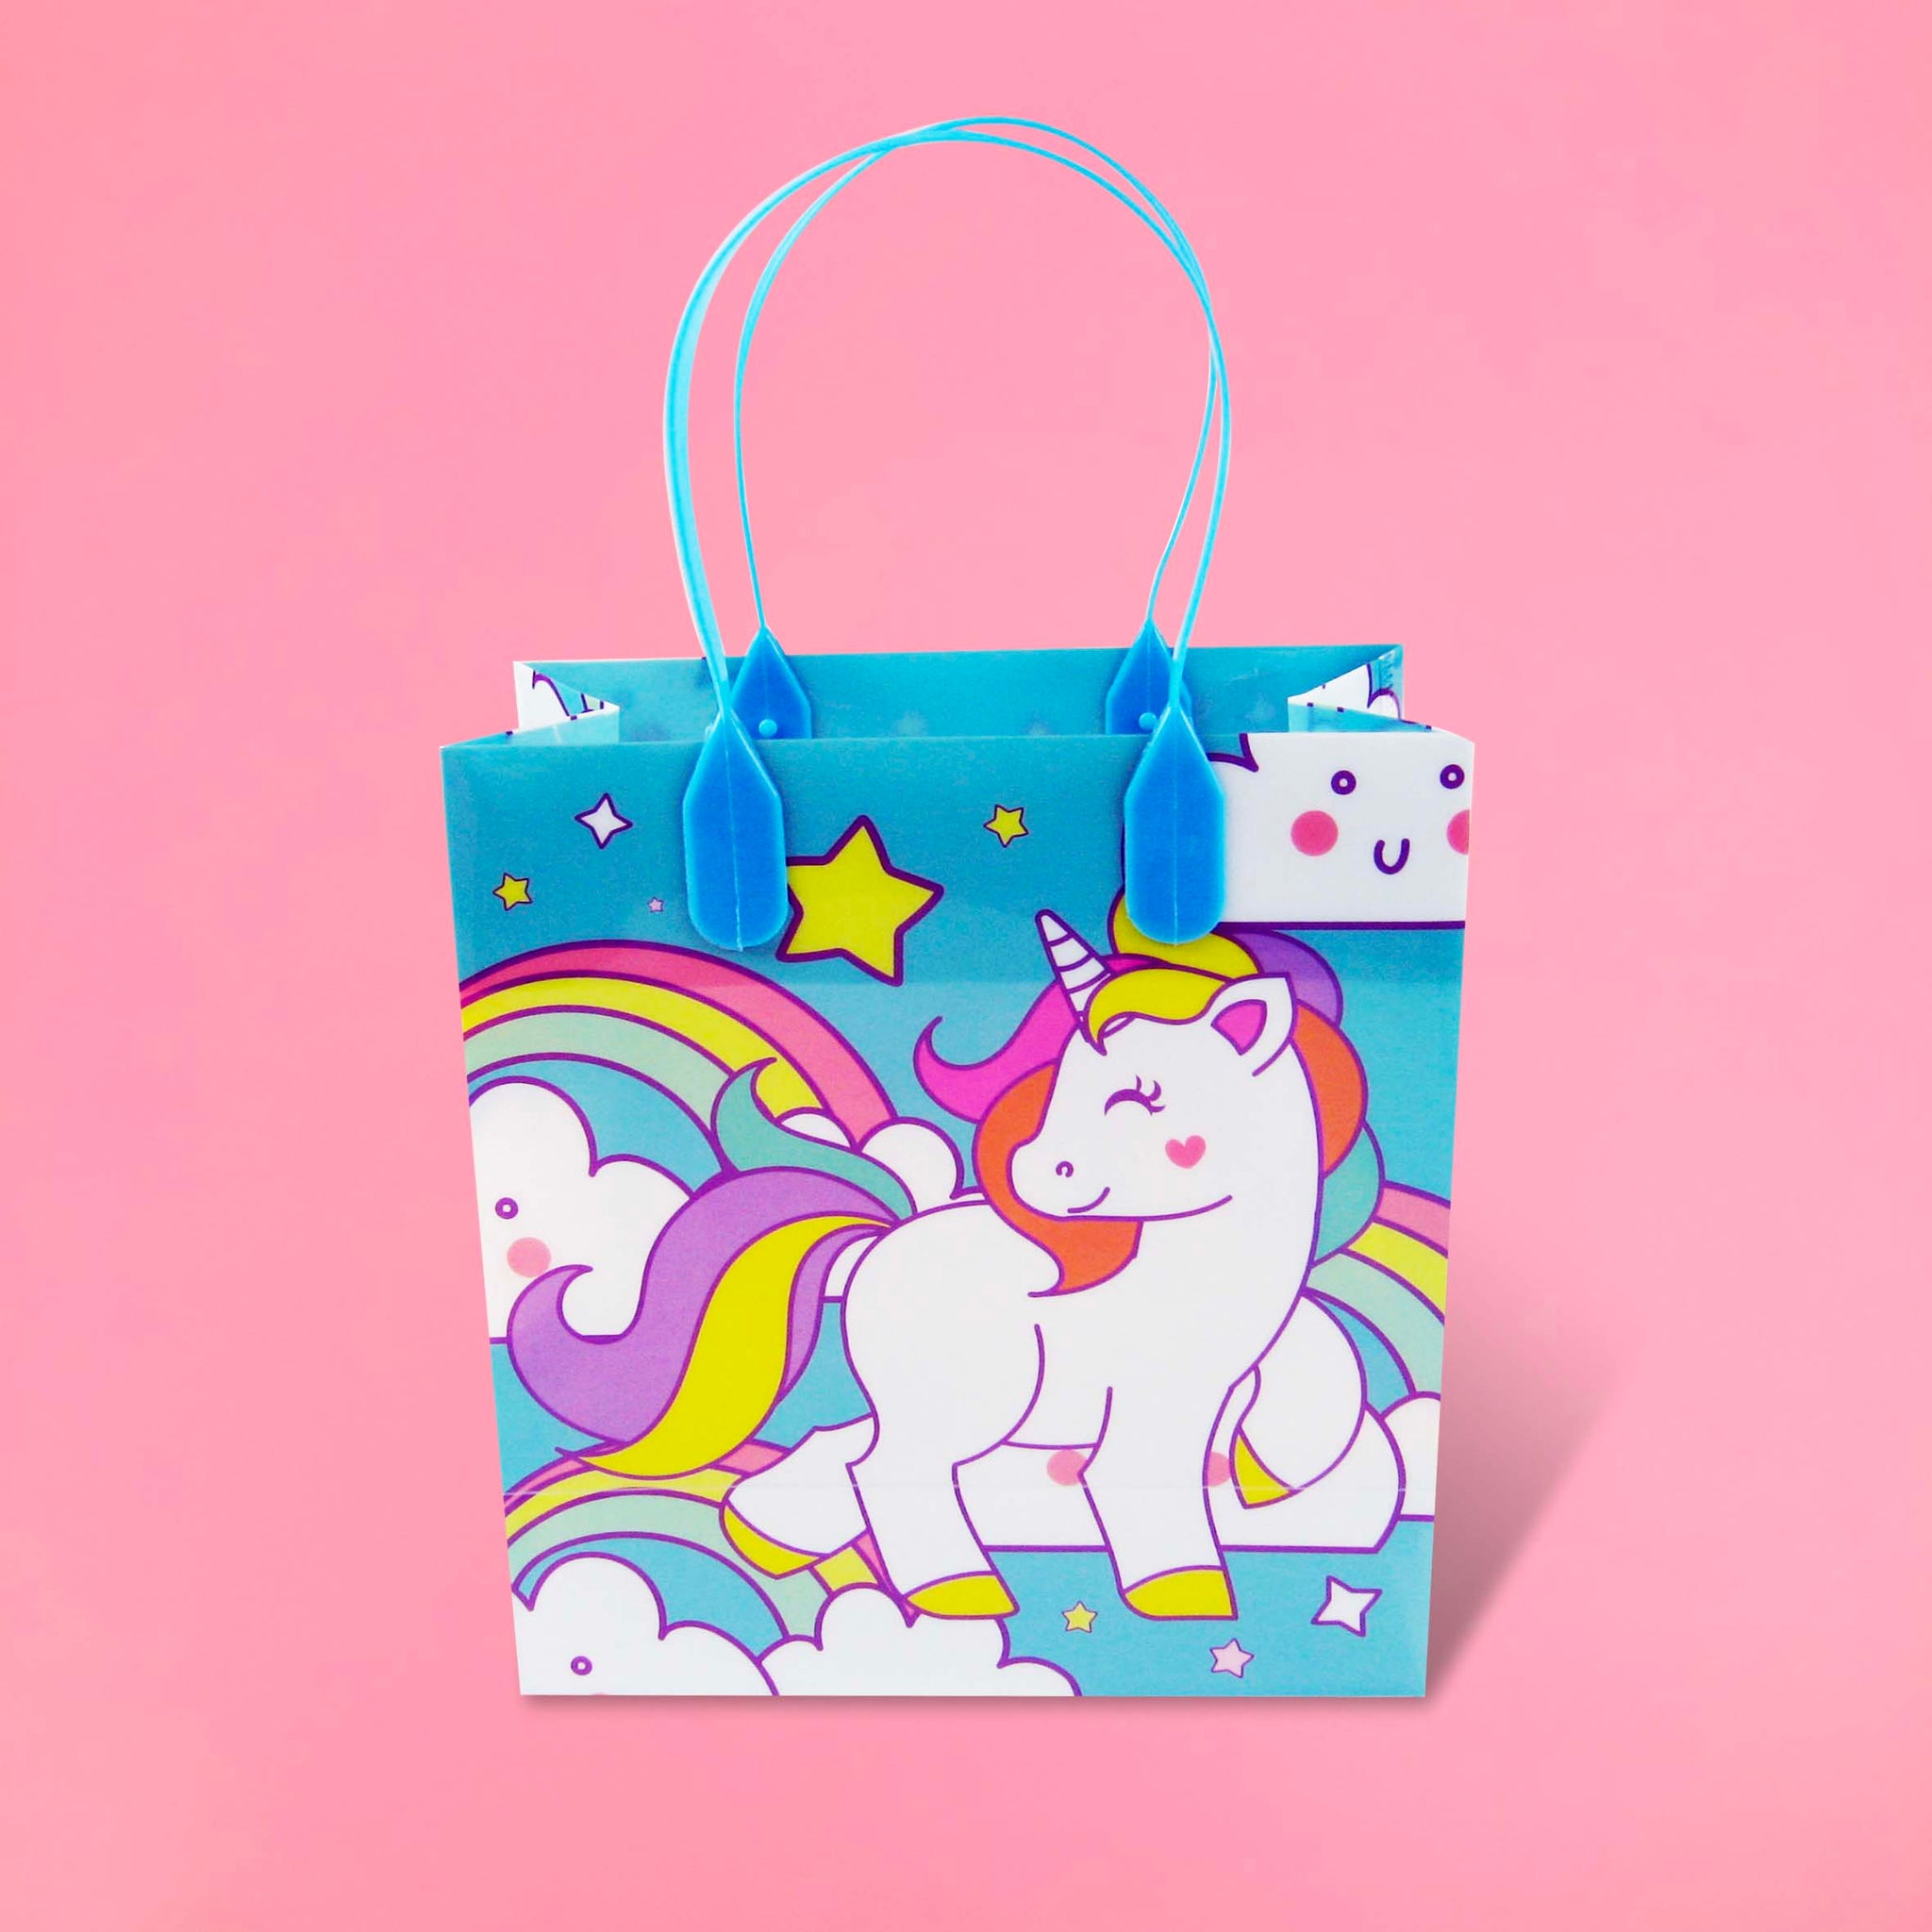 TINYMILLS Unicorn Party Favor Bags Treat Bags, 12 Pack